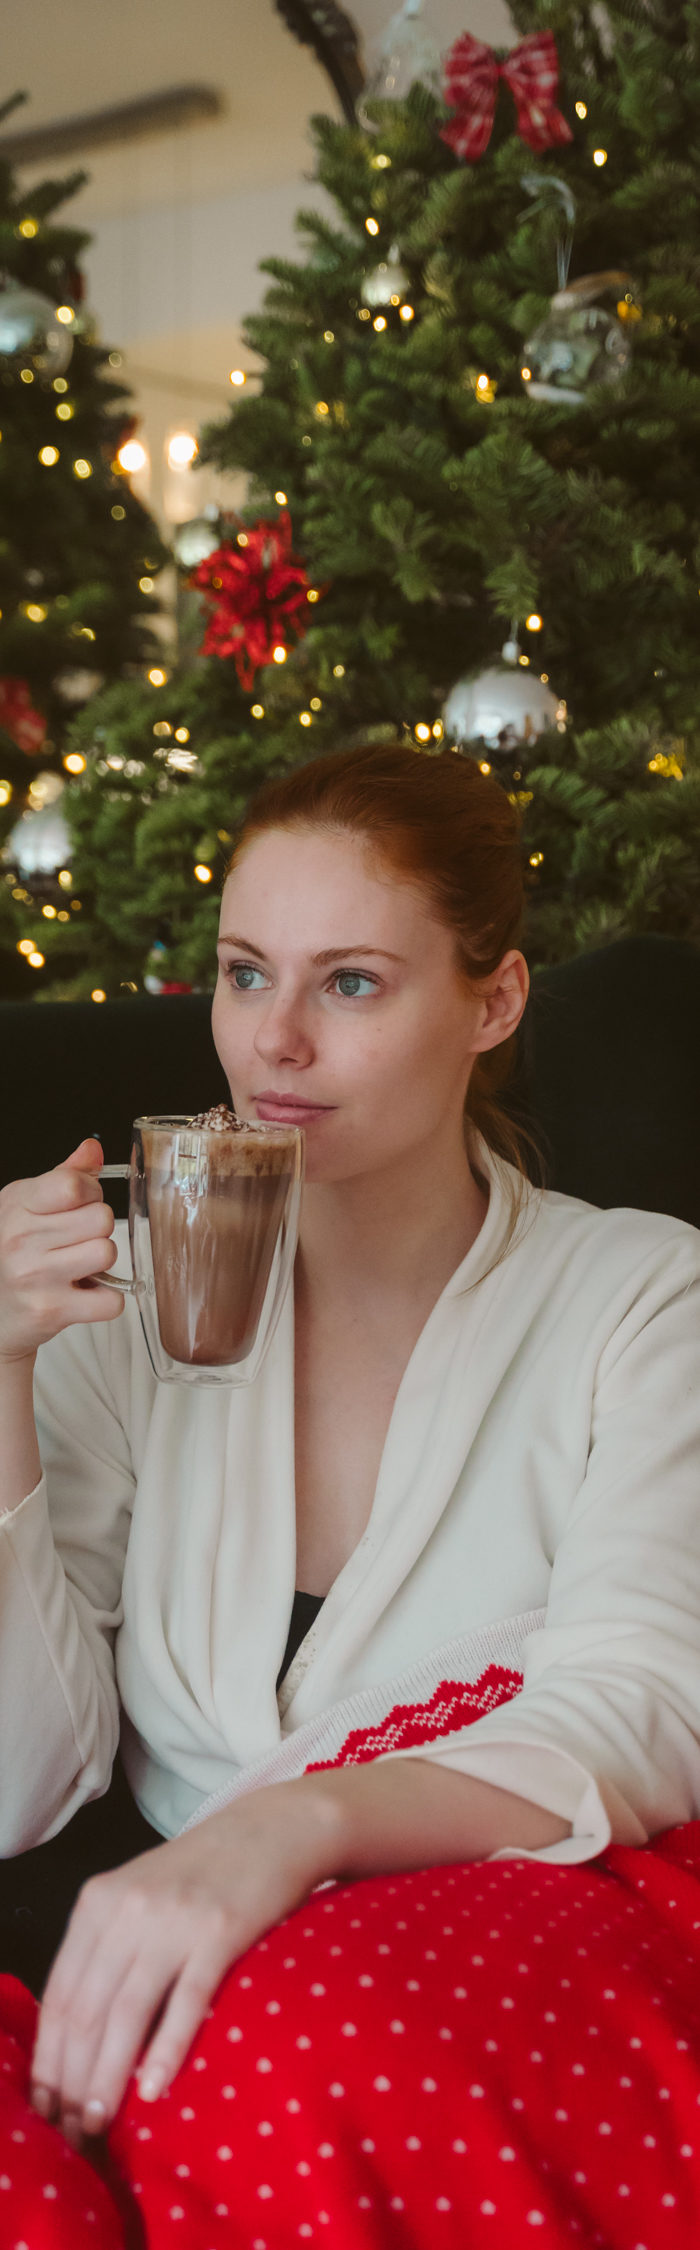 Miss USA 2011 Alyssa Campanella of The A List blog shares her Christmas morning hot cocoa recipe